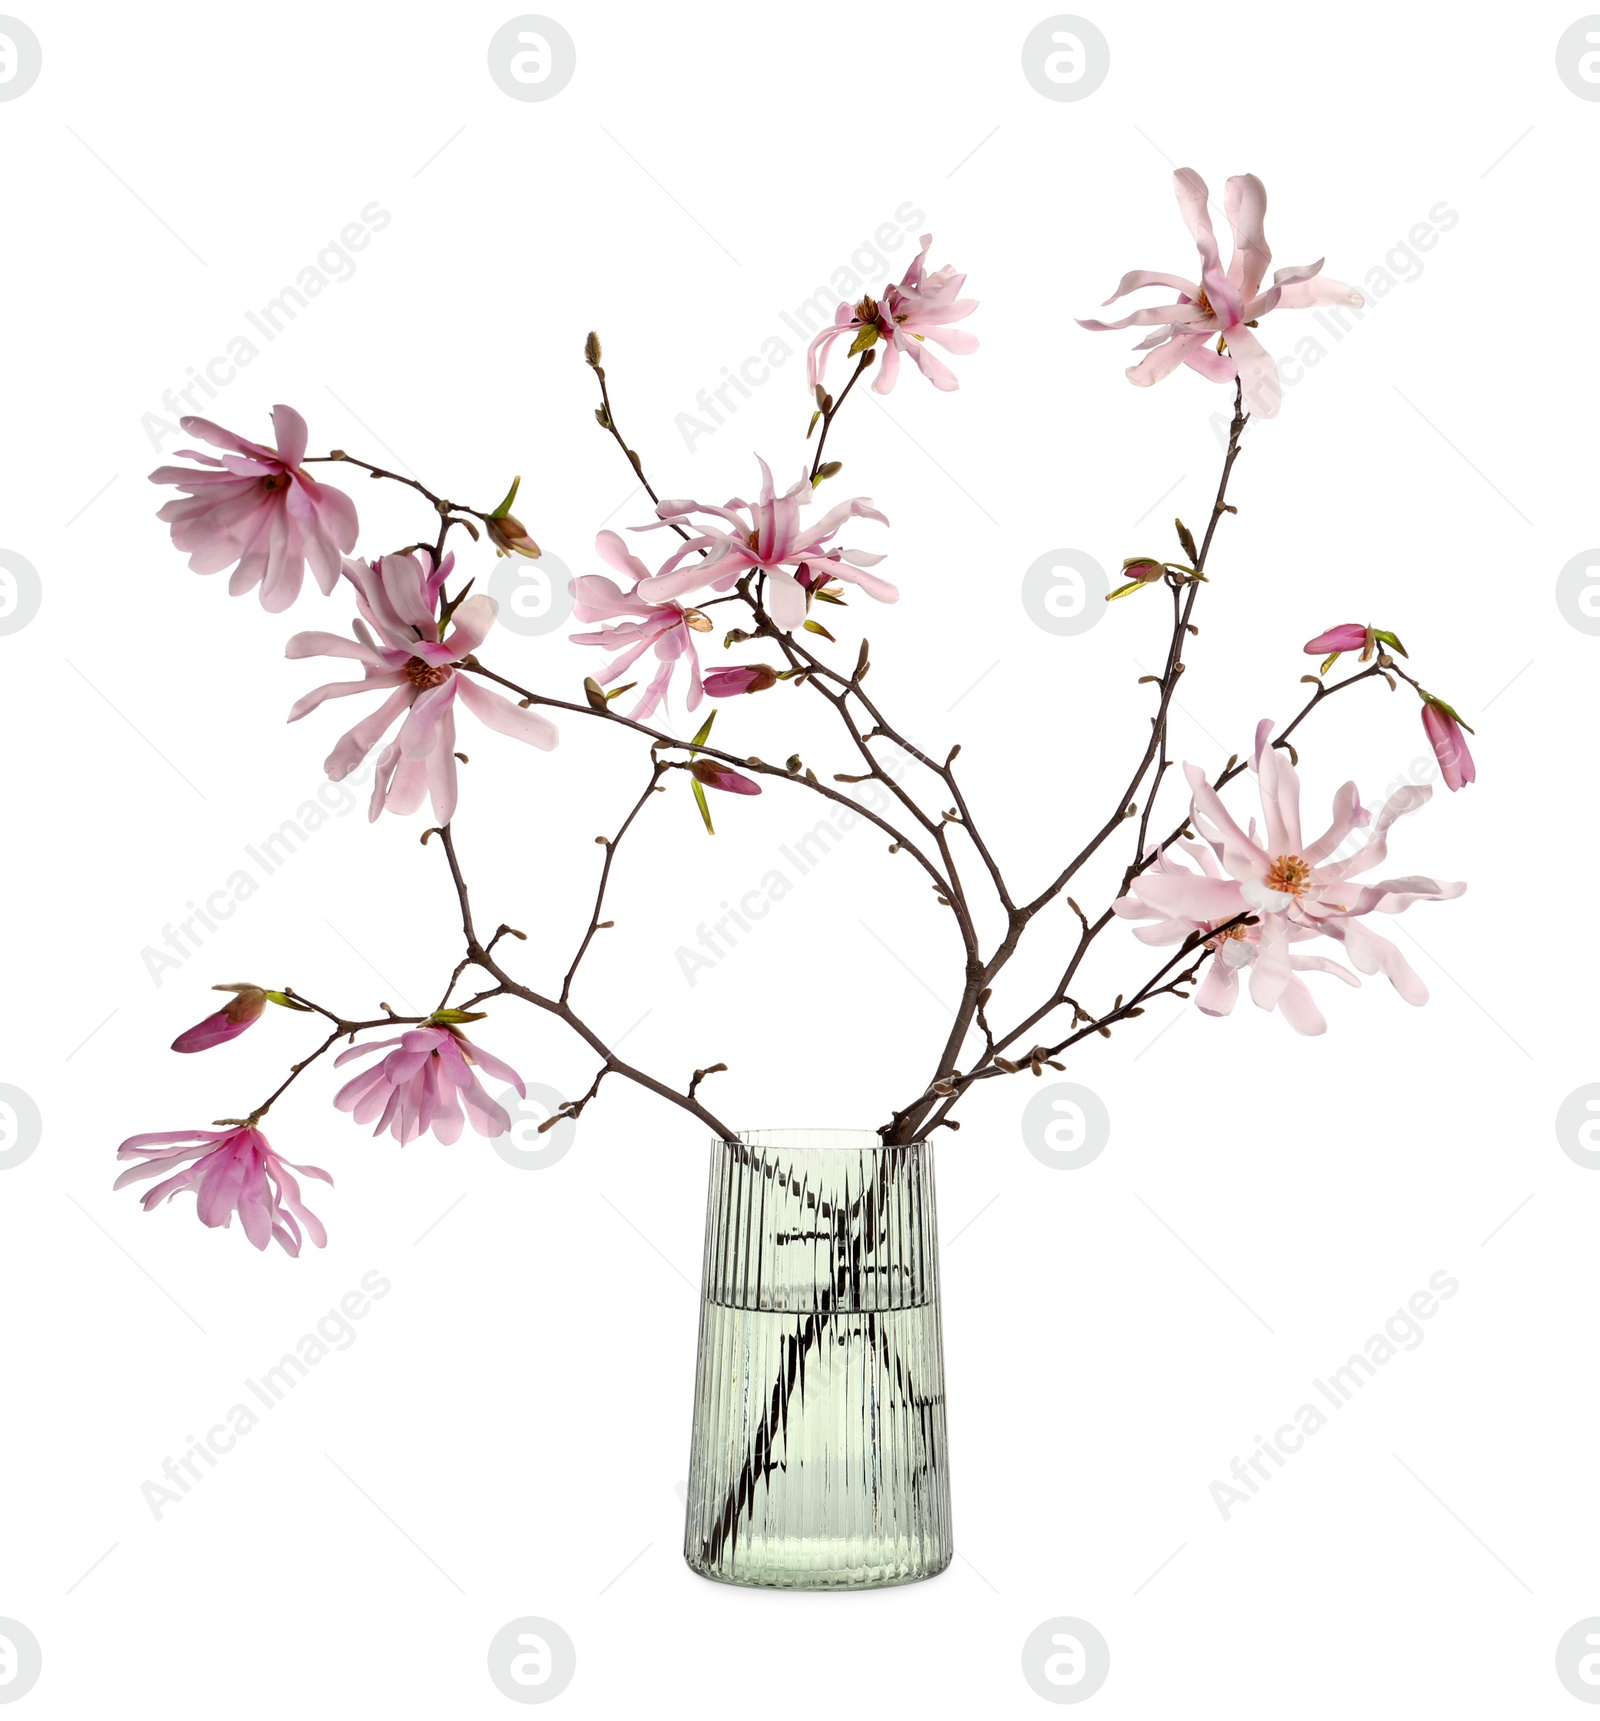 Photo of Magnolia tree branches with beautiful flowers in glass vase isolated on white